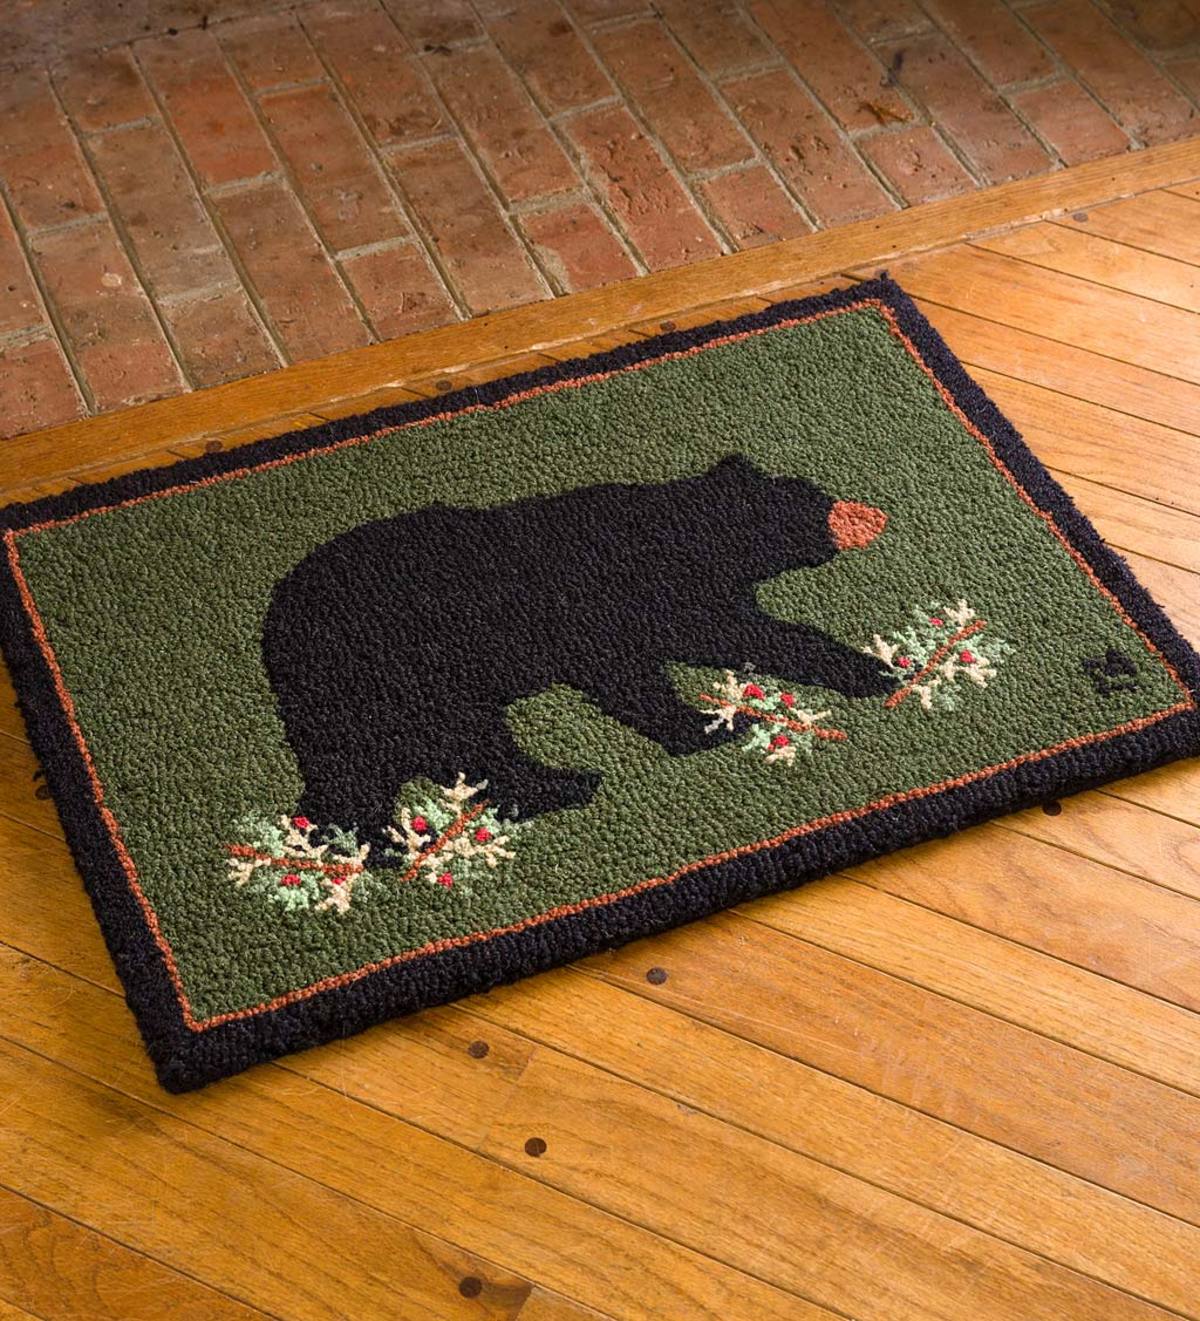 Hooked Wool Black Bear Accent Rug